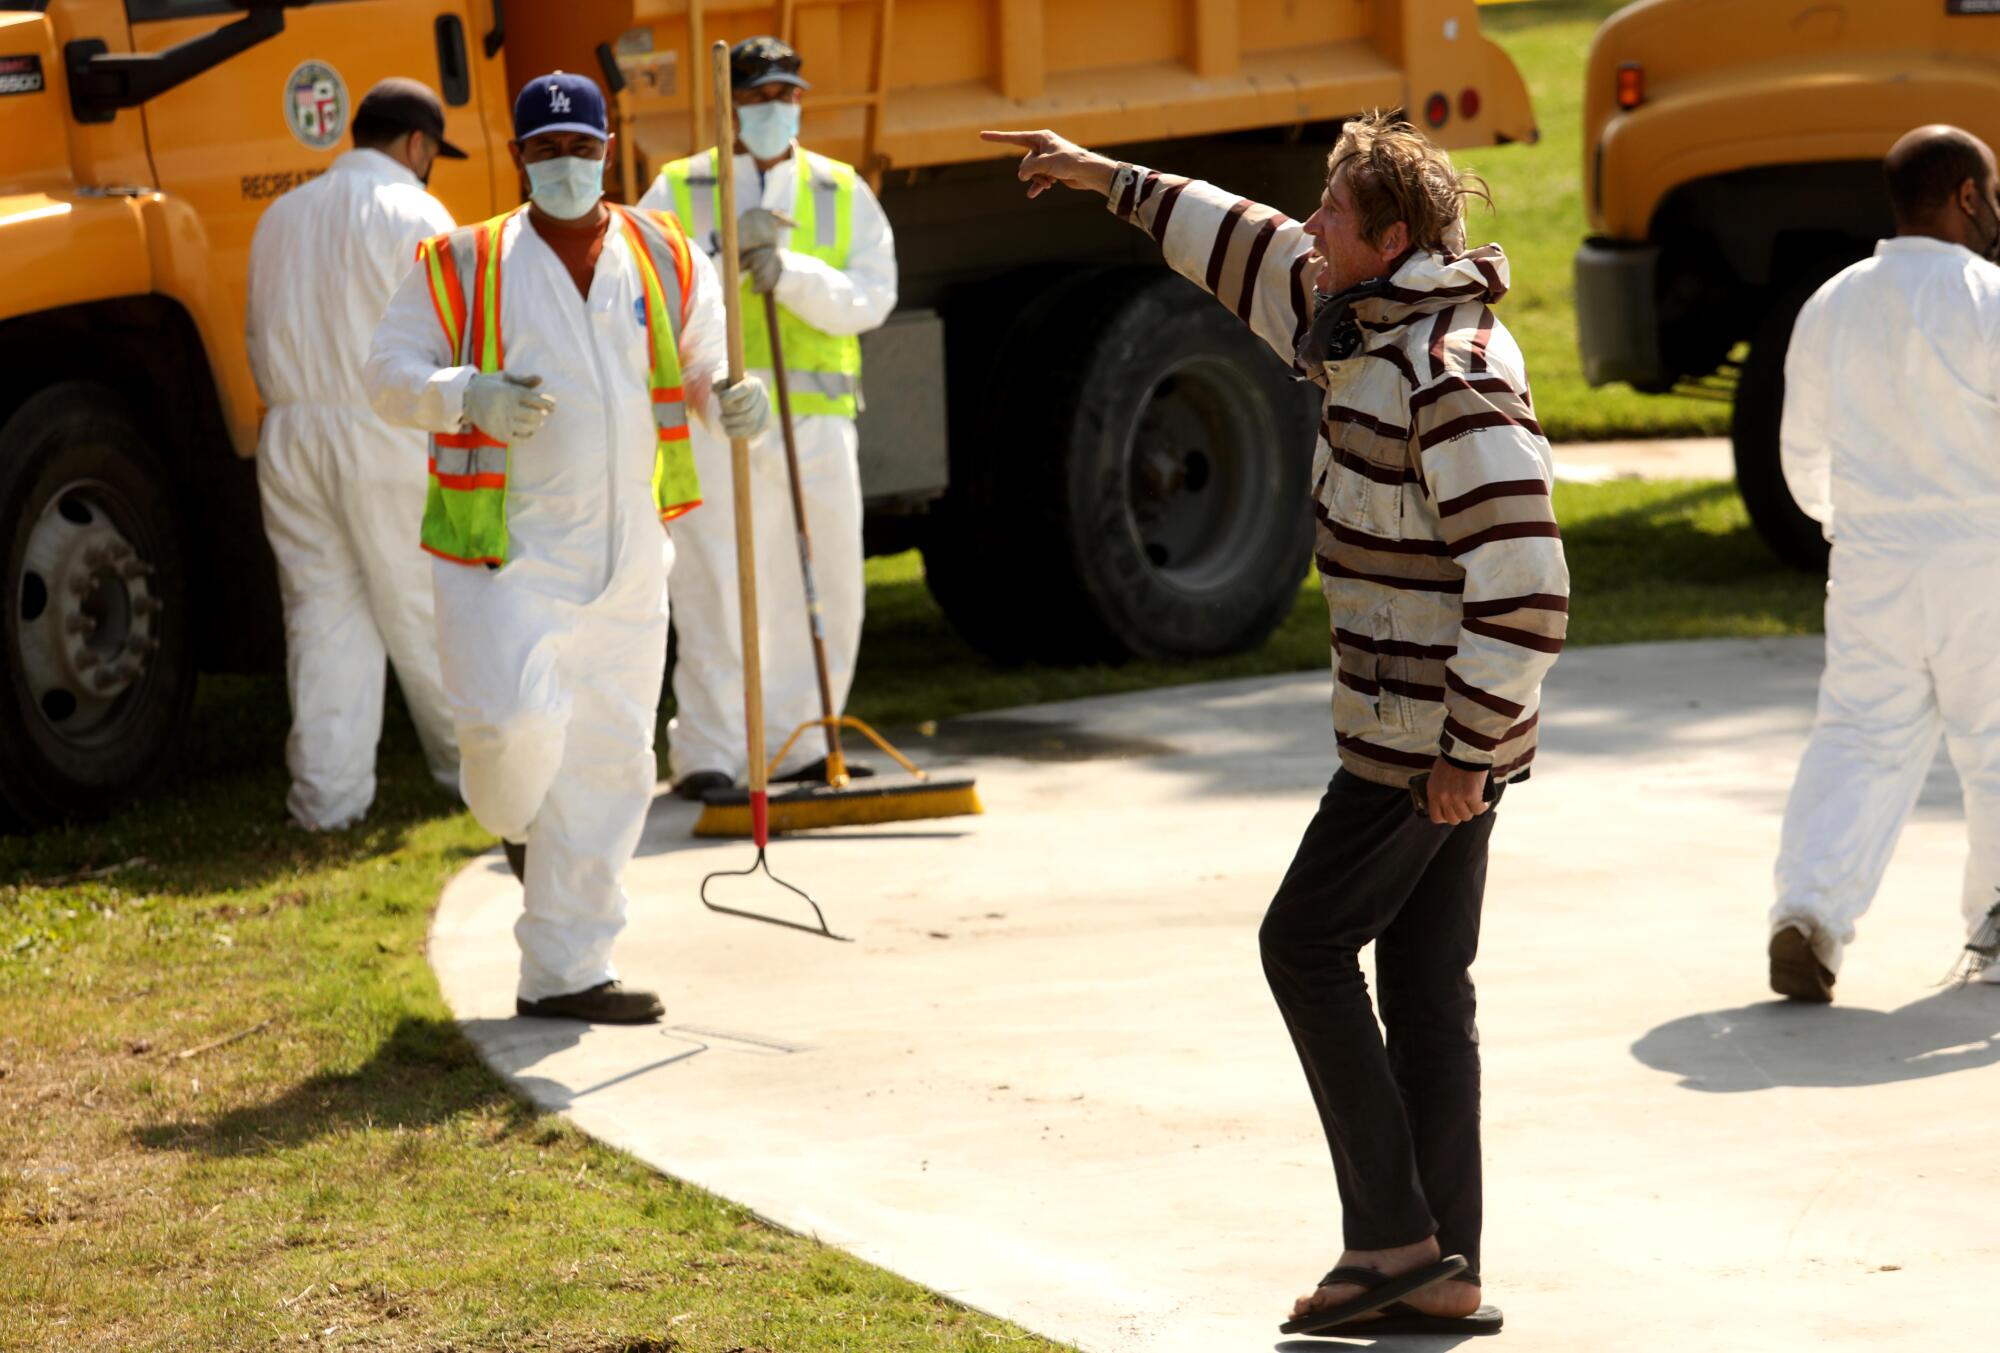 A homeless man yells at a sanitation crew workers in white jumpsuits